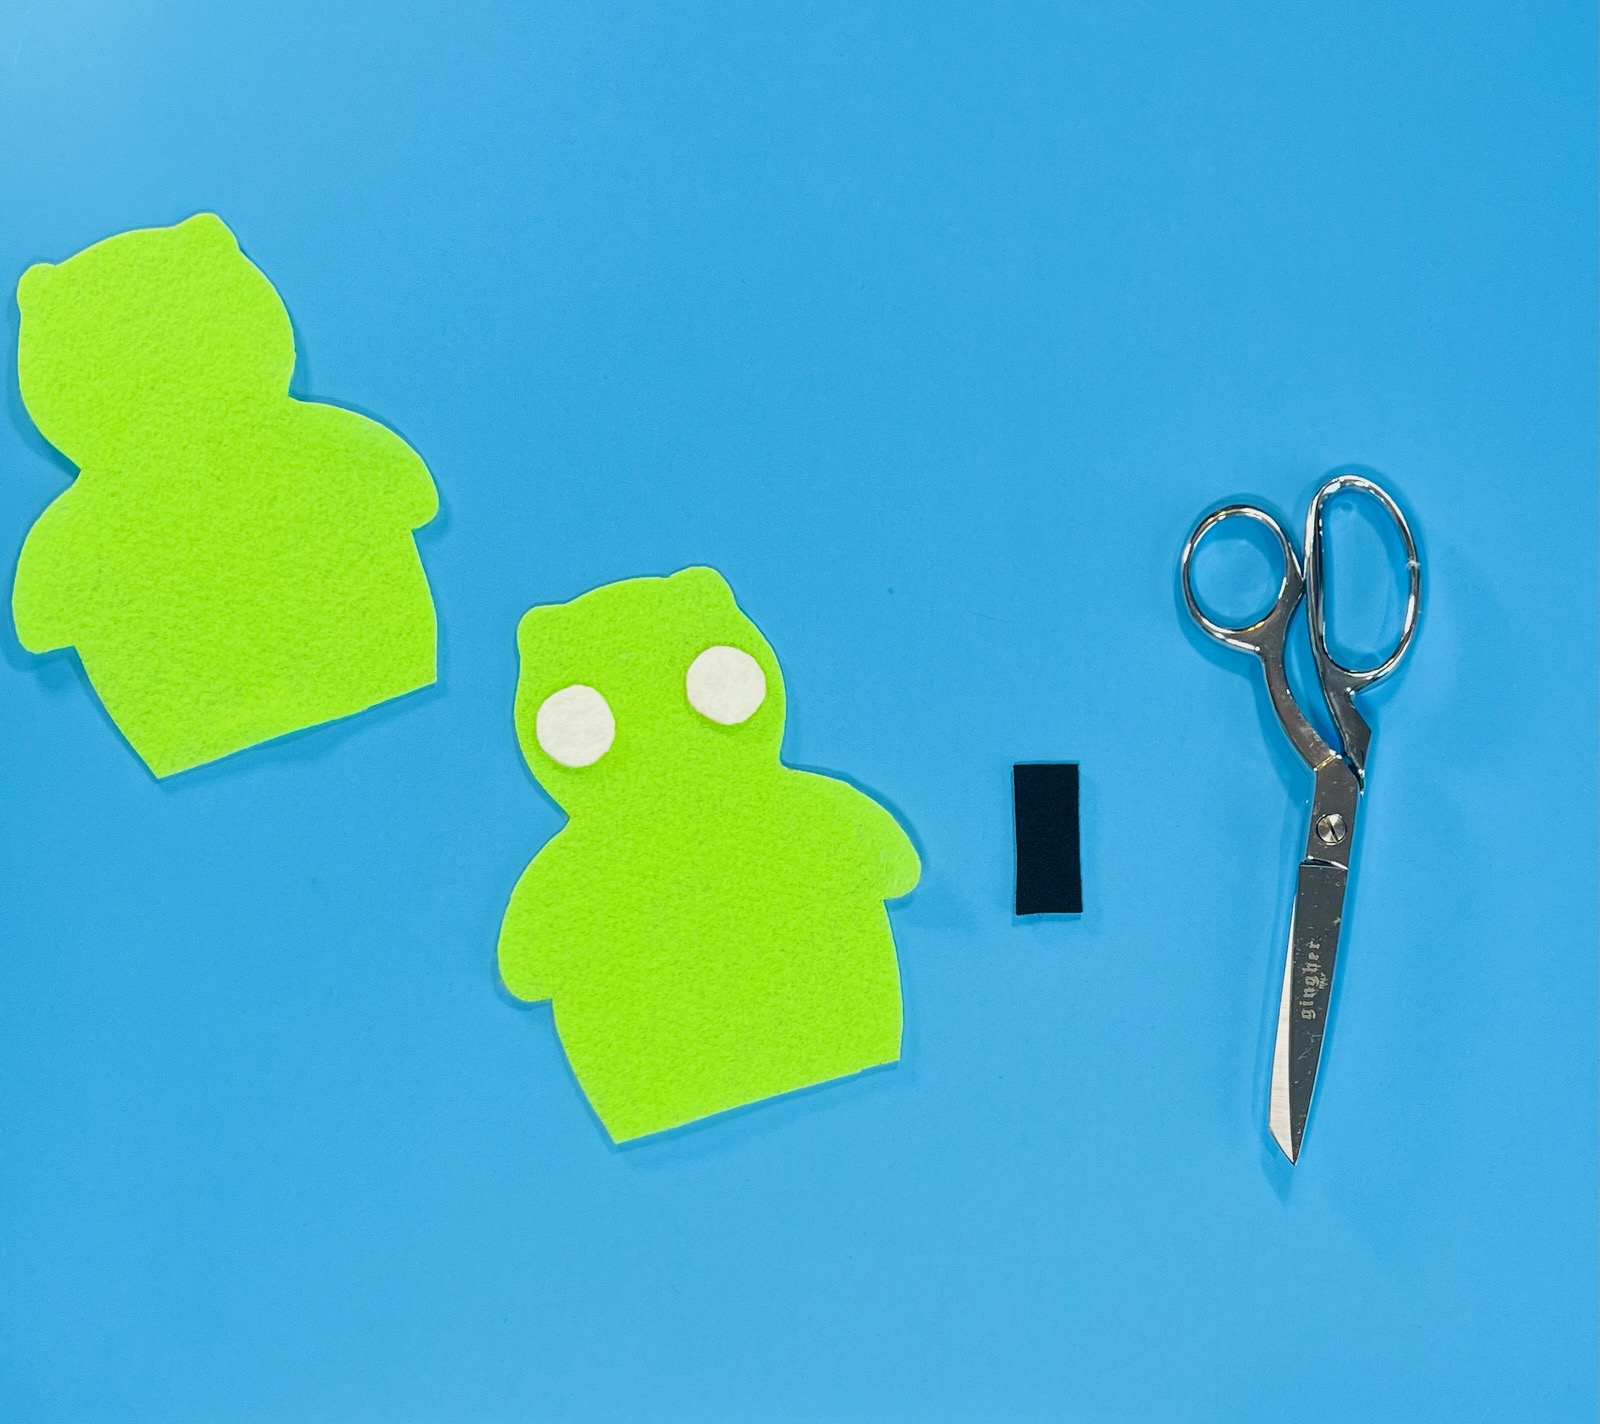 homemade kuchi kopi project with felt pieces and scissors